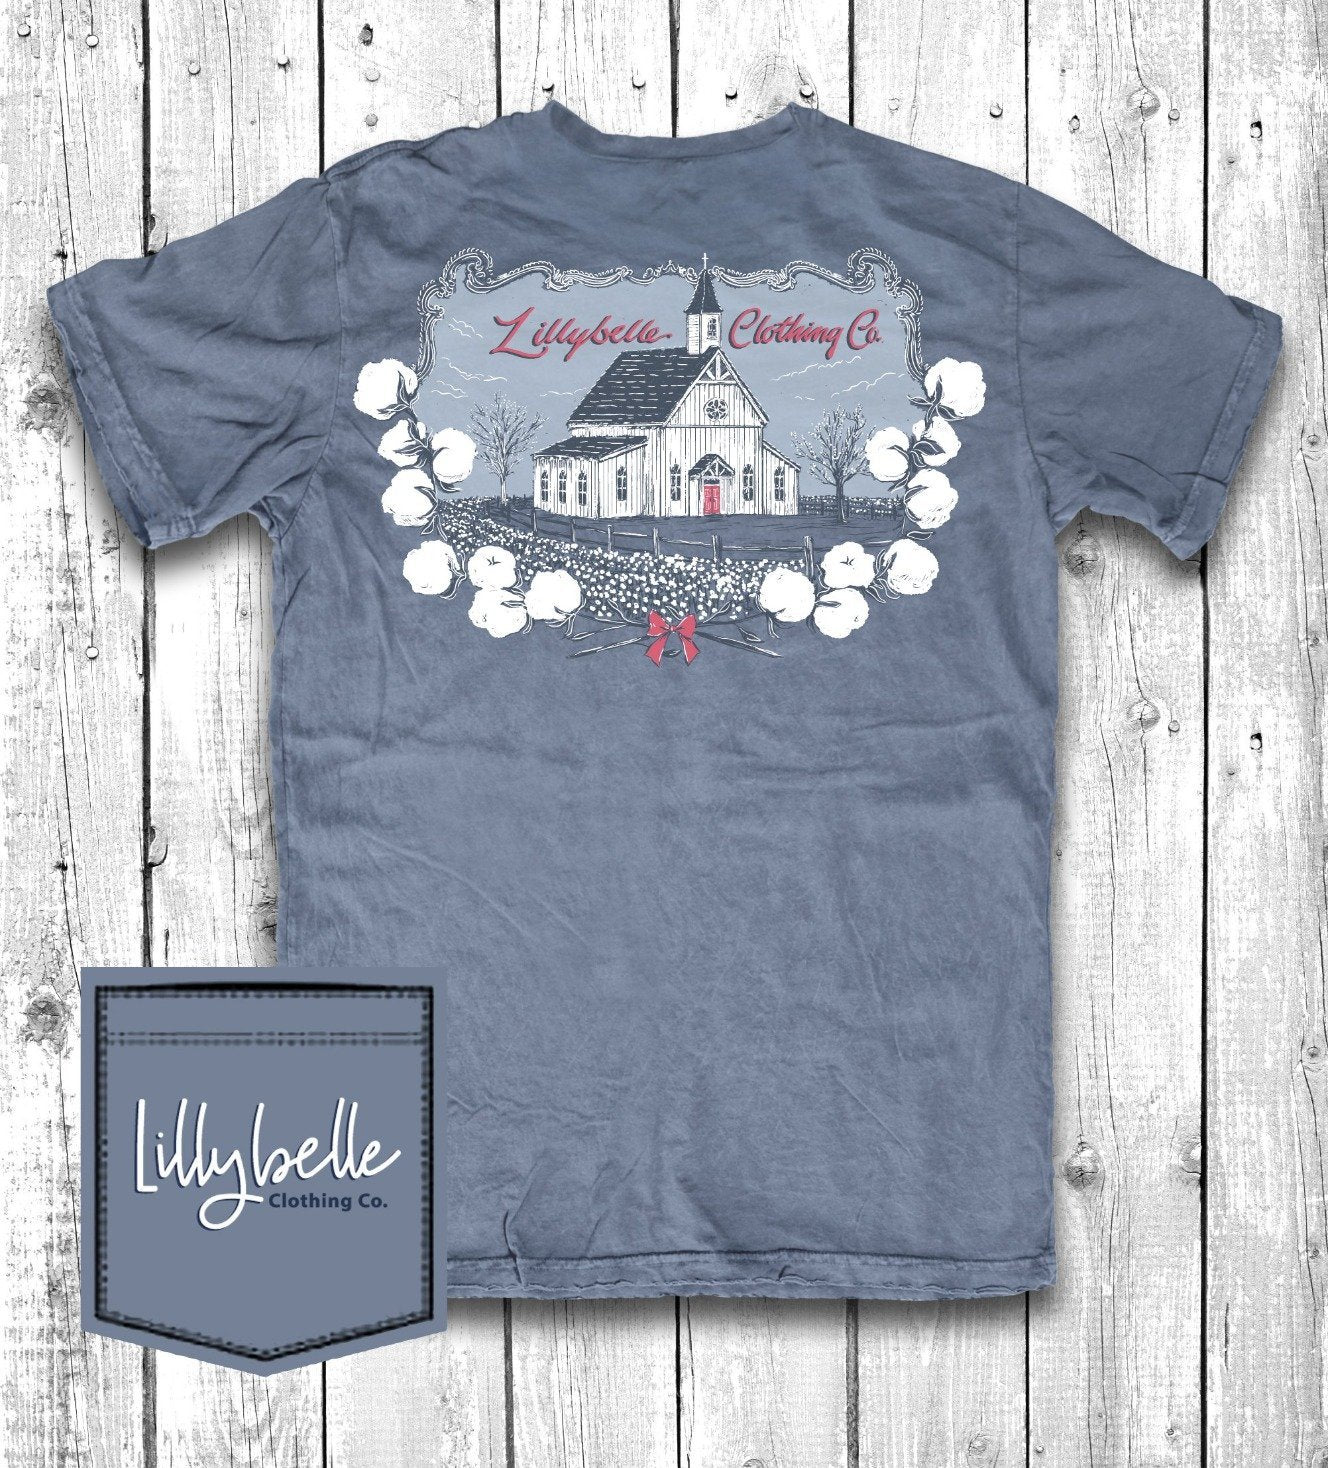 Church Bells - Short Sleeve T-Shirt (Youth) by Lillybelle